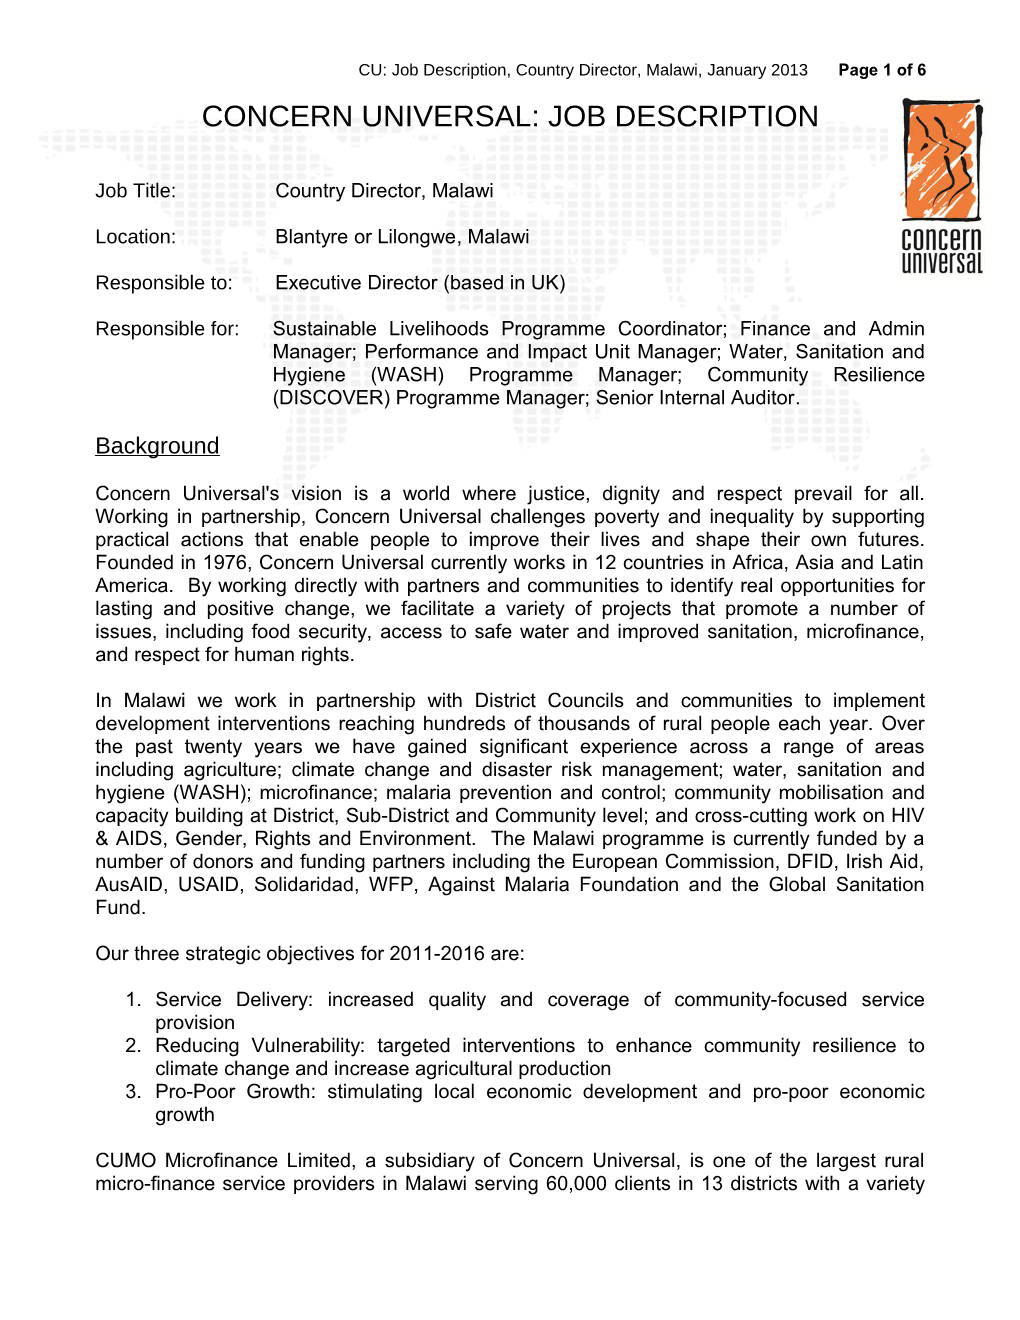 CU: Job Description, Country Director, Malawi, January 2013Page 1 of 5